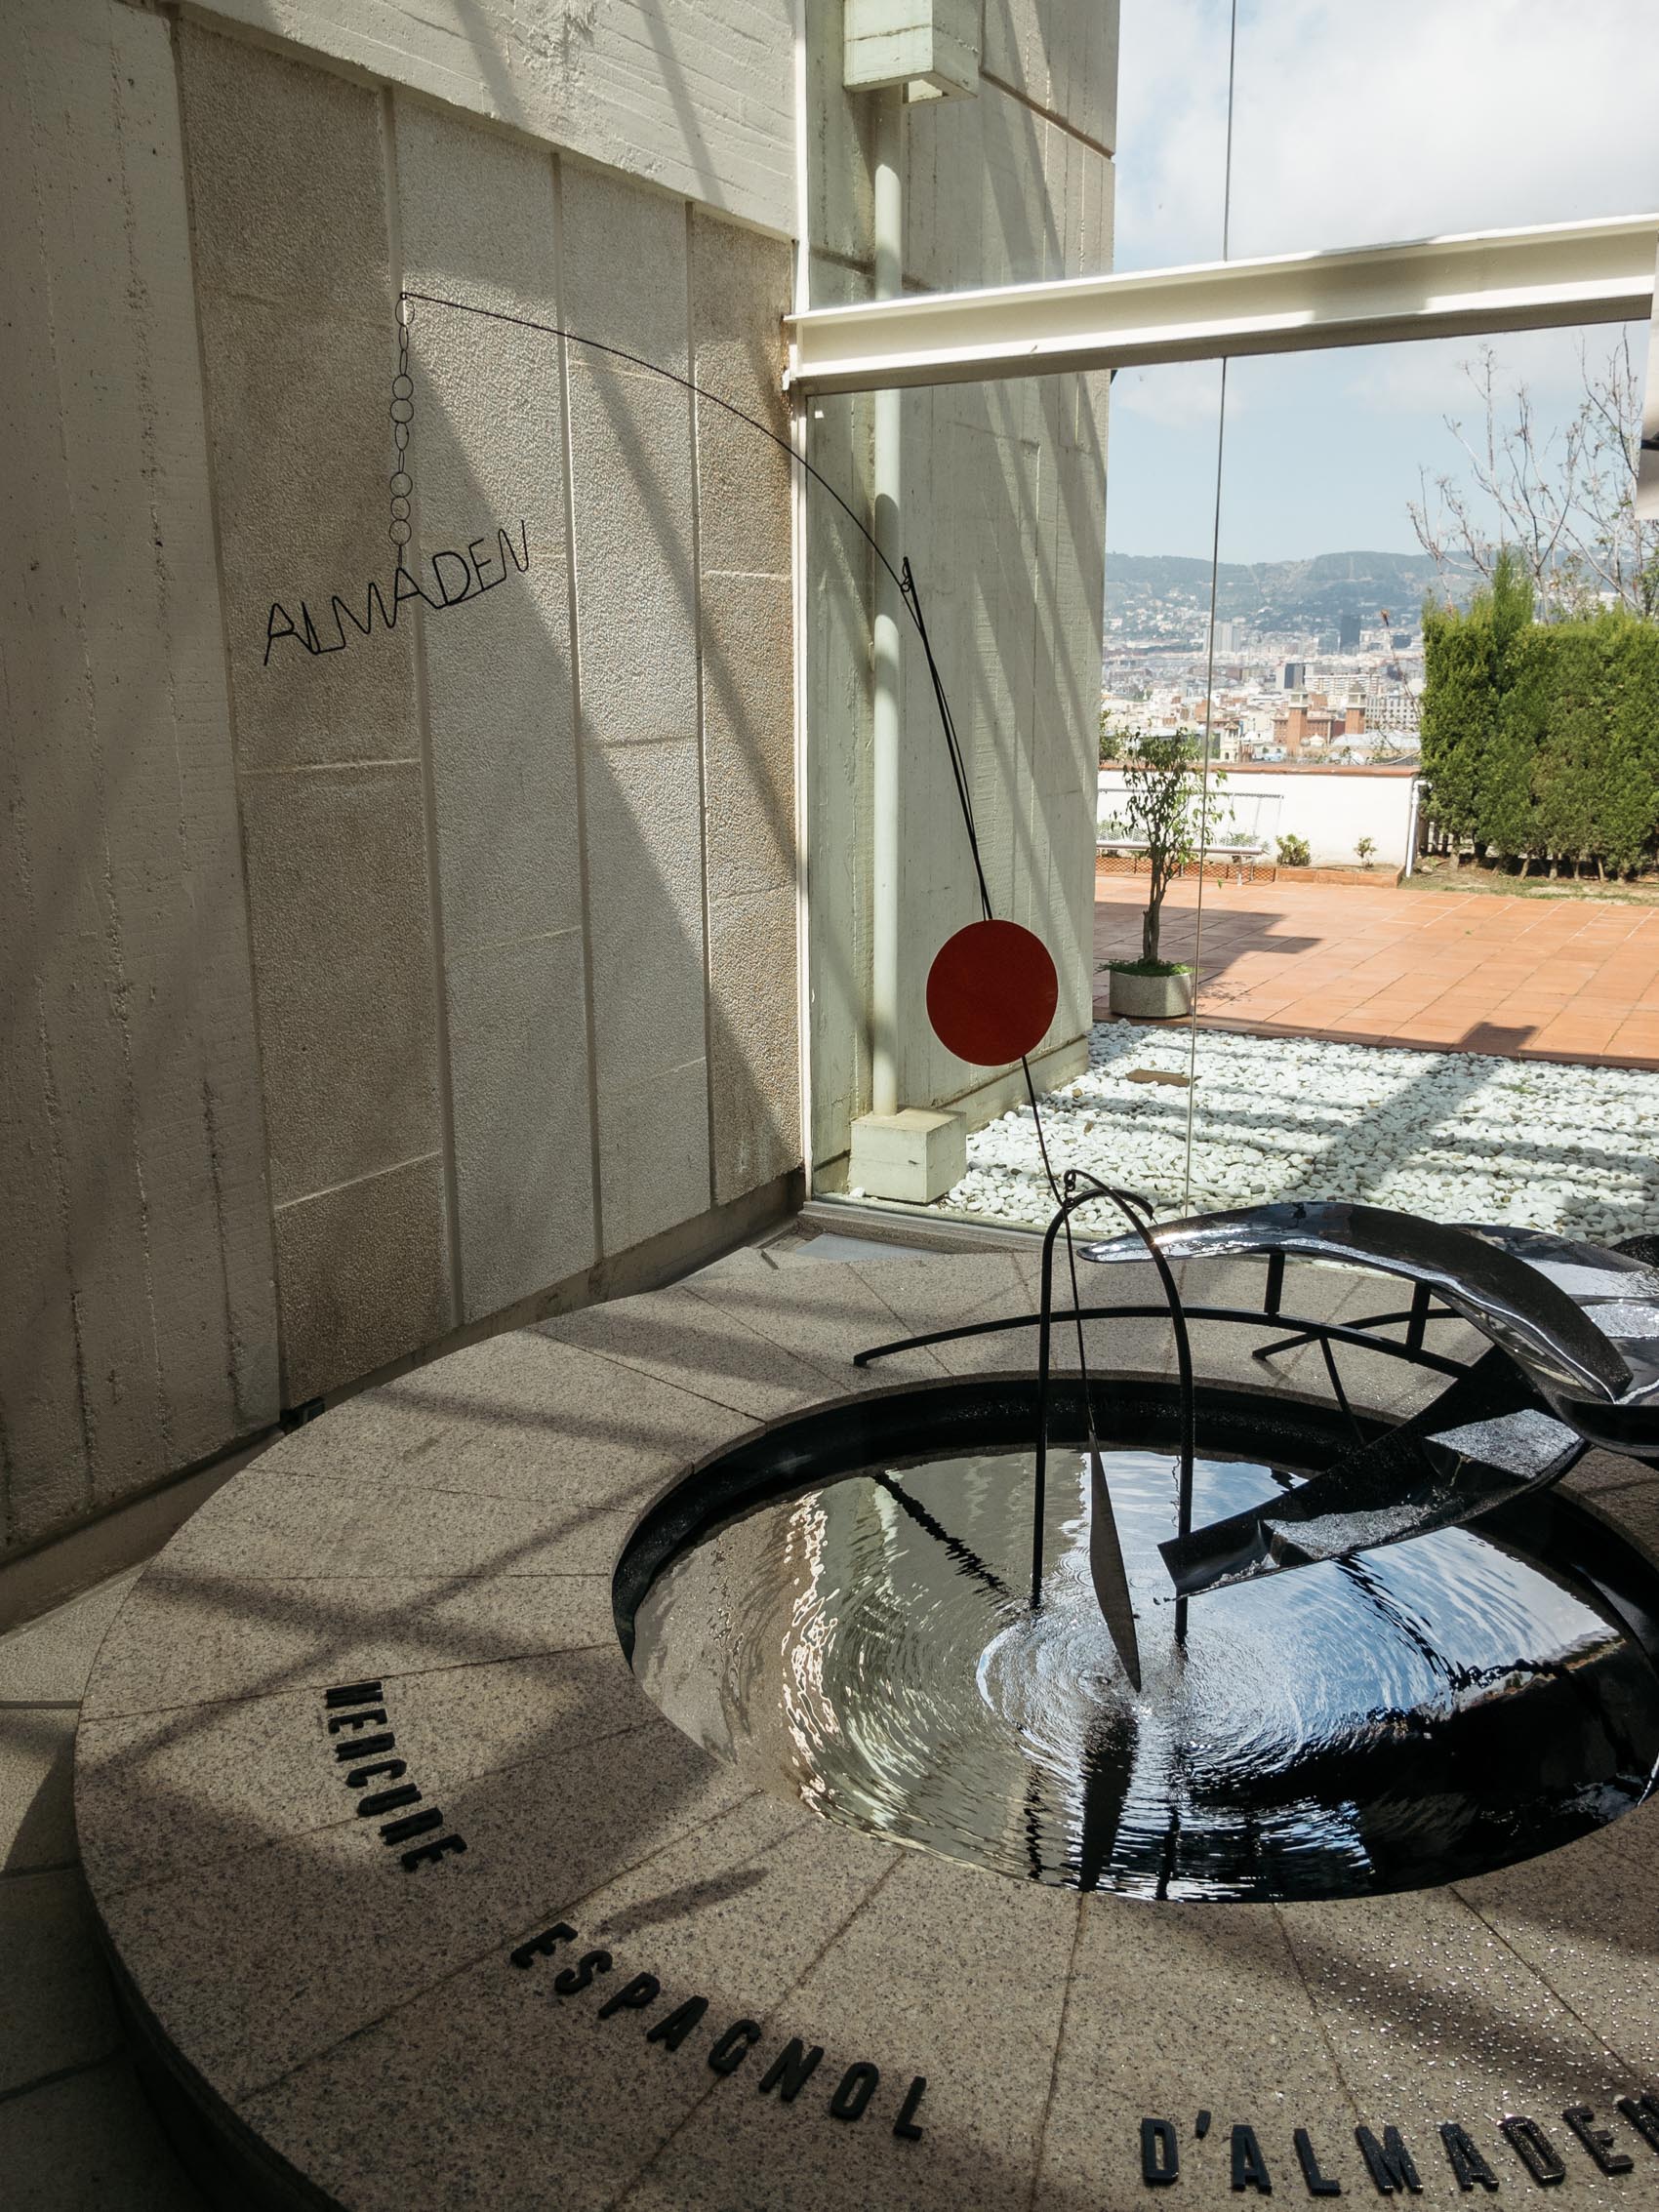 The Joan Miró Foundation is one of six Barcelona museums you can visit with the 30€ Art Passport